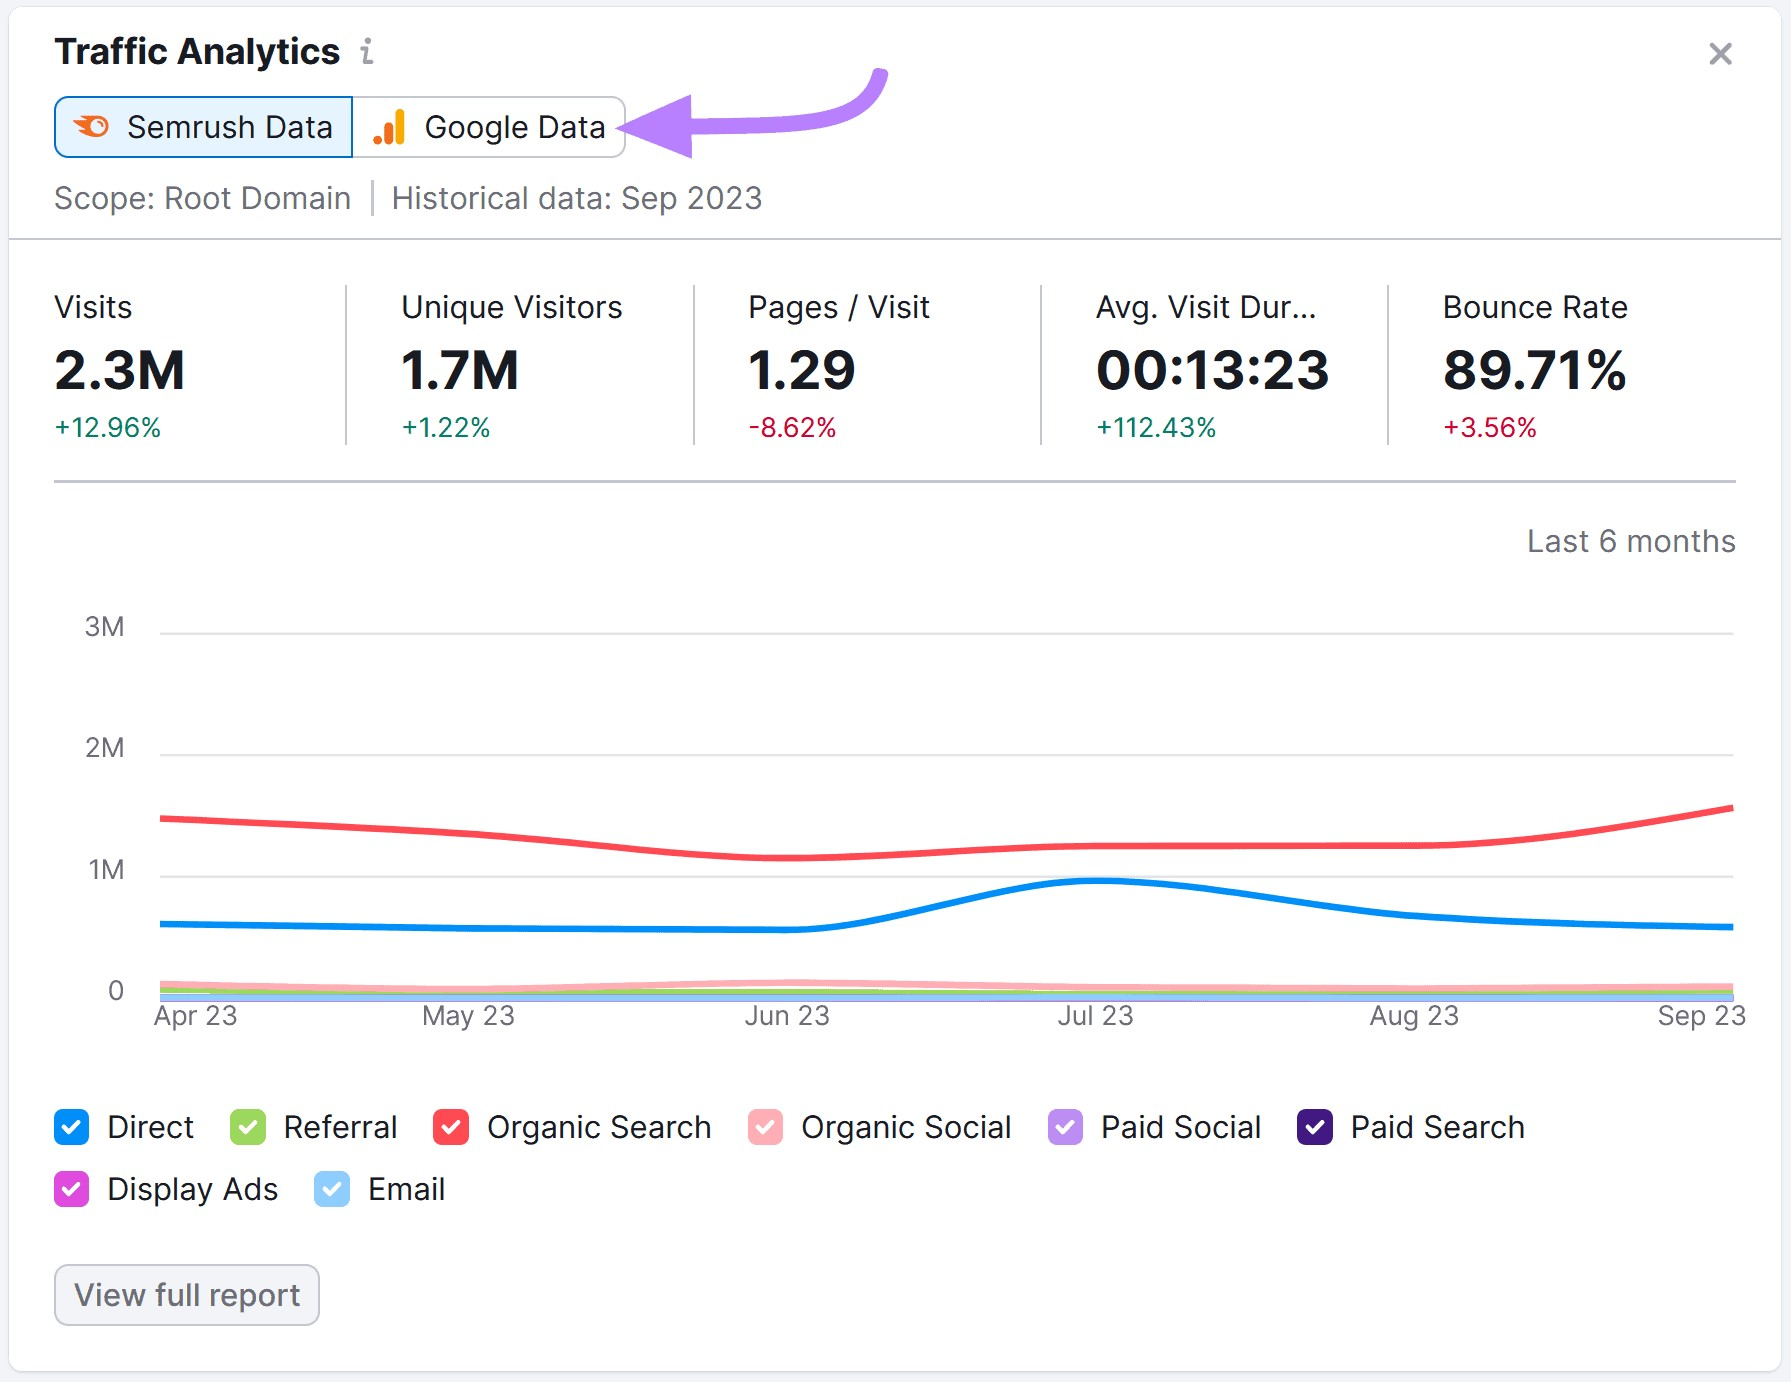 “Google Data” toggle highlighted at the top of “Traffic Analytics” widget